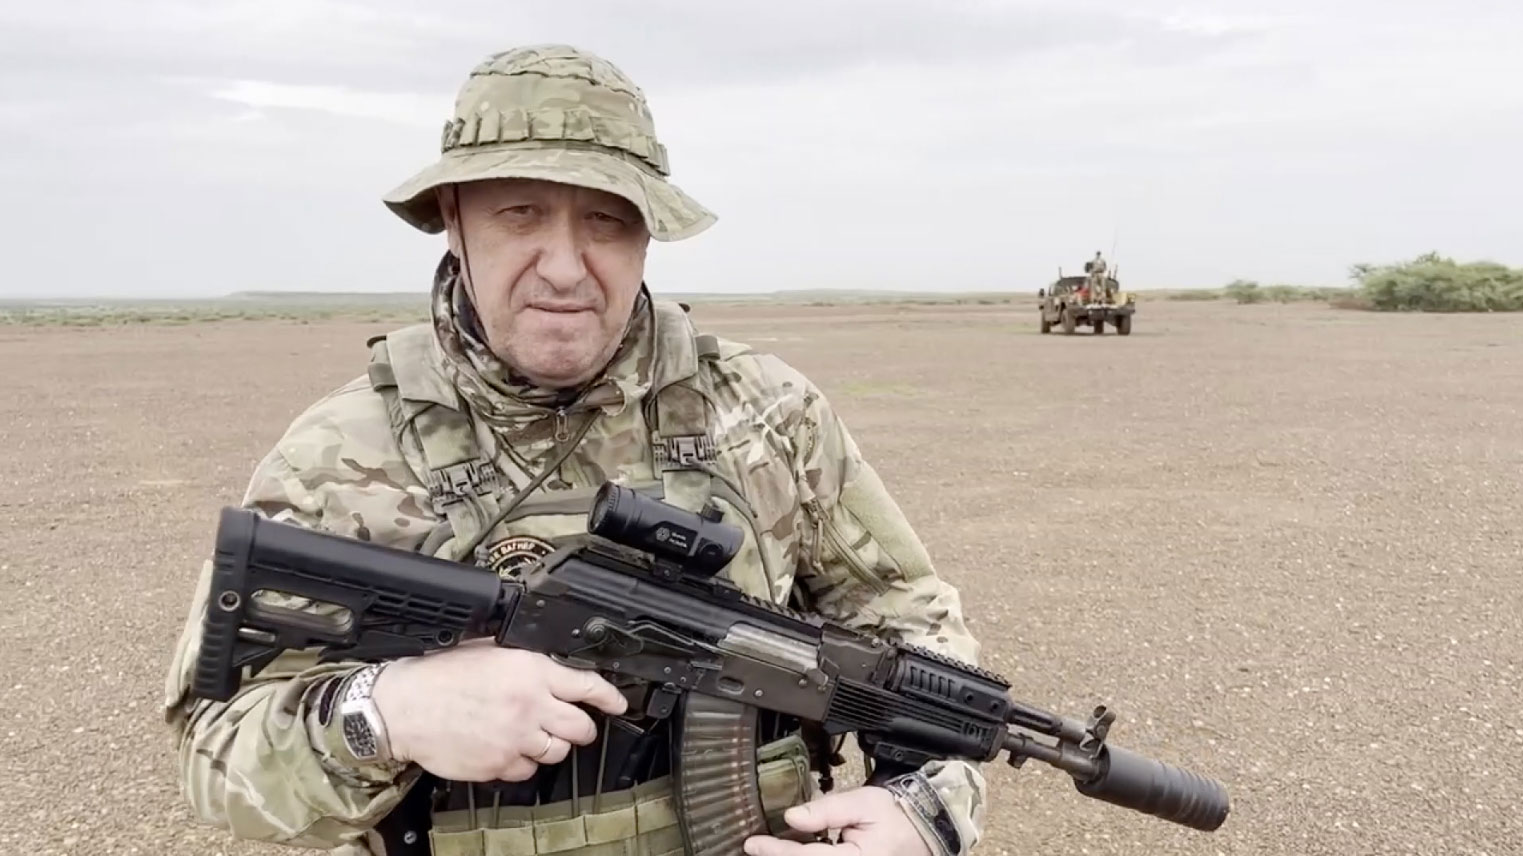 video screenshot of Yevgeny Prigozhin holding a rifle in a desert area while wearing camouflage